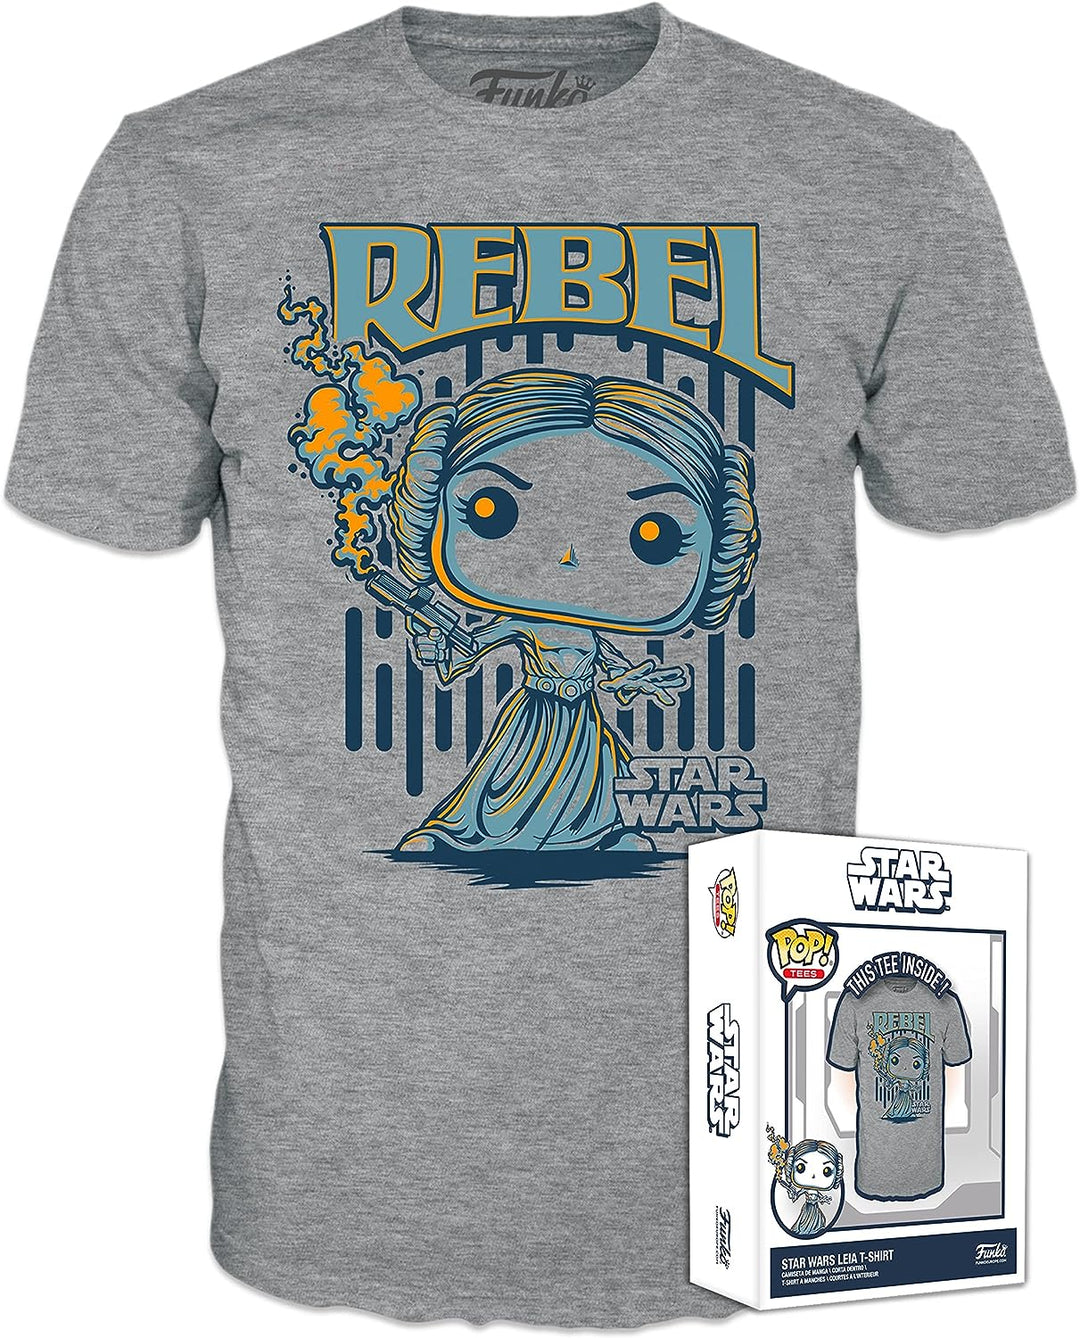 Funko Boxed Tee: Star Wars - Leia - Extra Large - (XL) - T-Shirt - Clothes - Gift Idea - Short Sleeve Top for Adults Unisex Men and Women